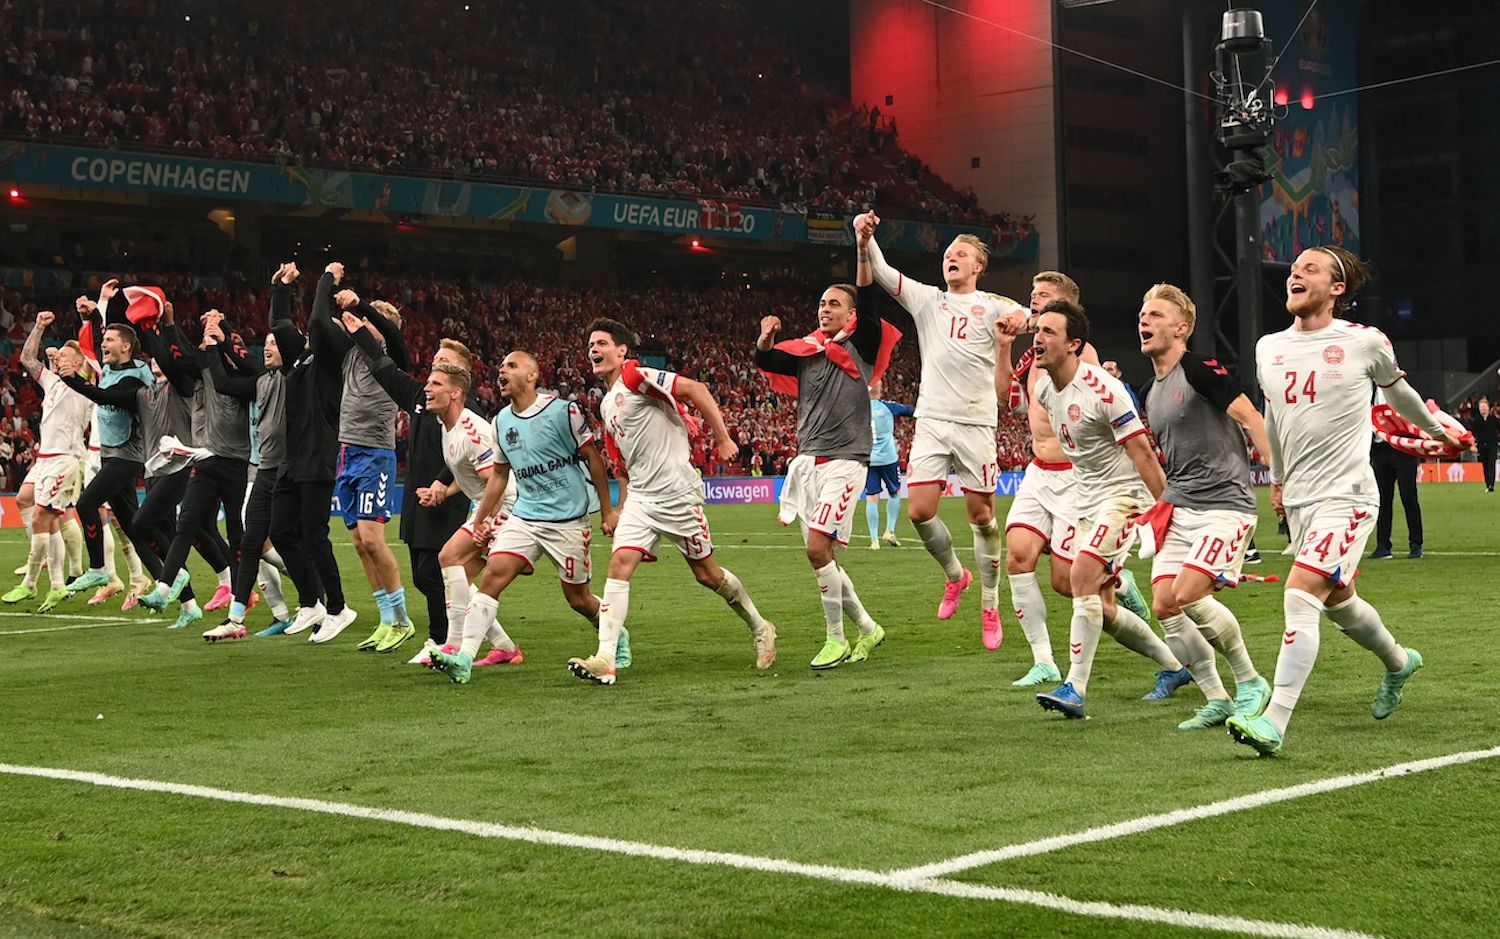 Denmark's players celebrate at the end of the UEFA EURO 2020 Group B football match between Russia and Denmark at Parken Stadium in Copenhagen on June 21, 2021. (Photo by Jonathan NACKSTRAND / POOL / AFP) (Photo by JONATHAN NACKSTRAND/POOL/AFP via Getty Images)